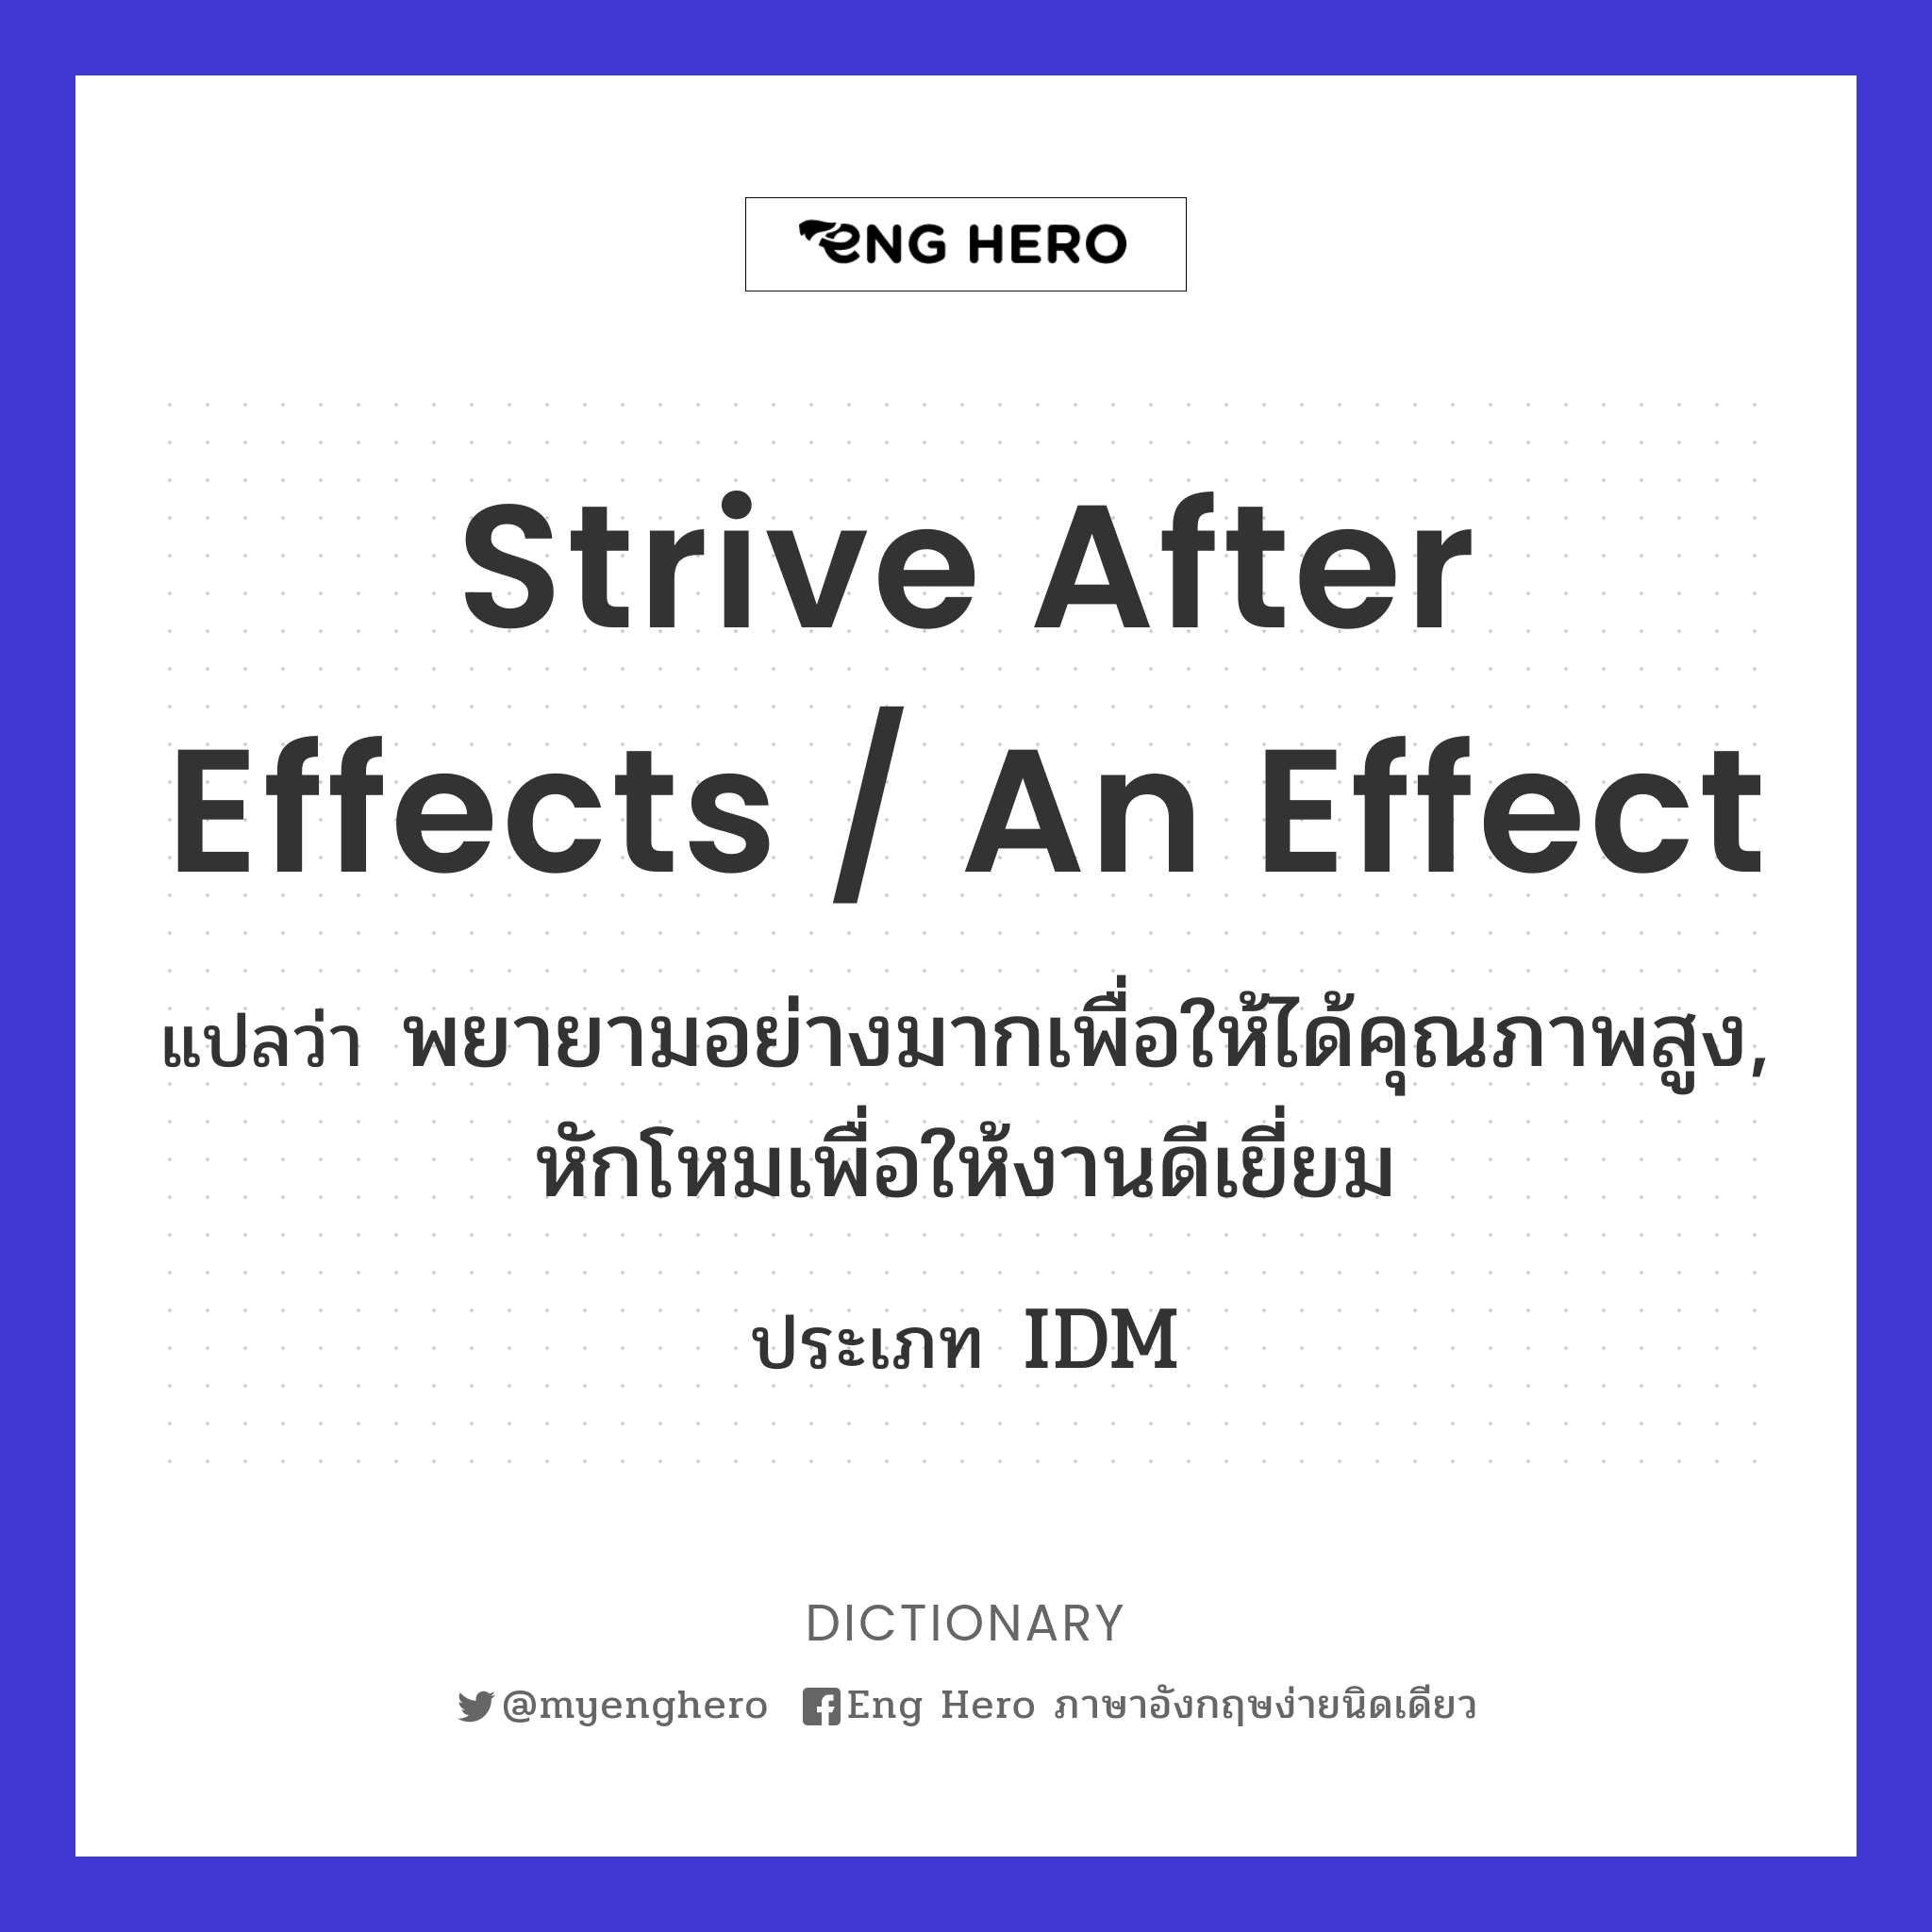 strive after effects / an effect